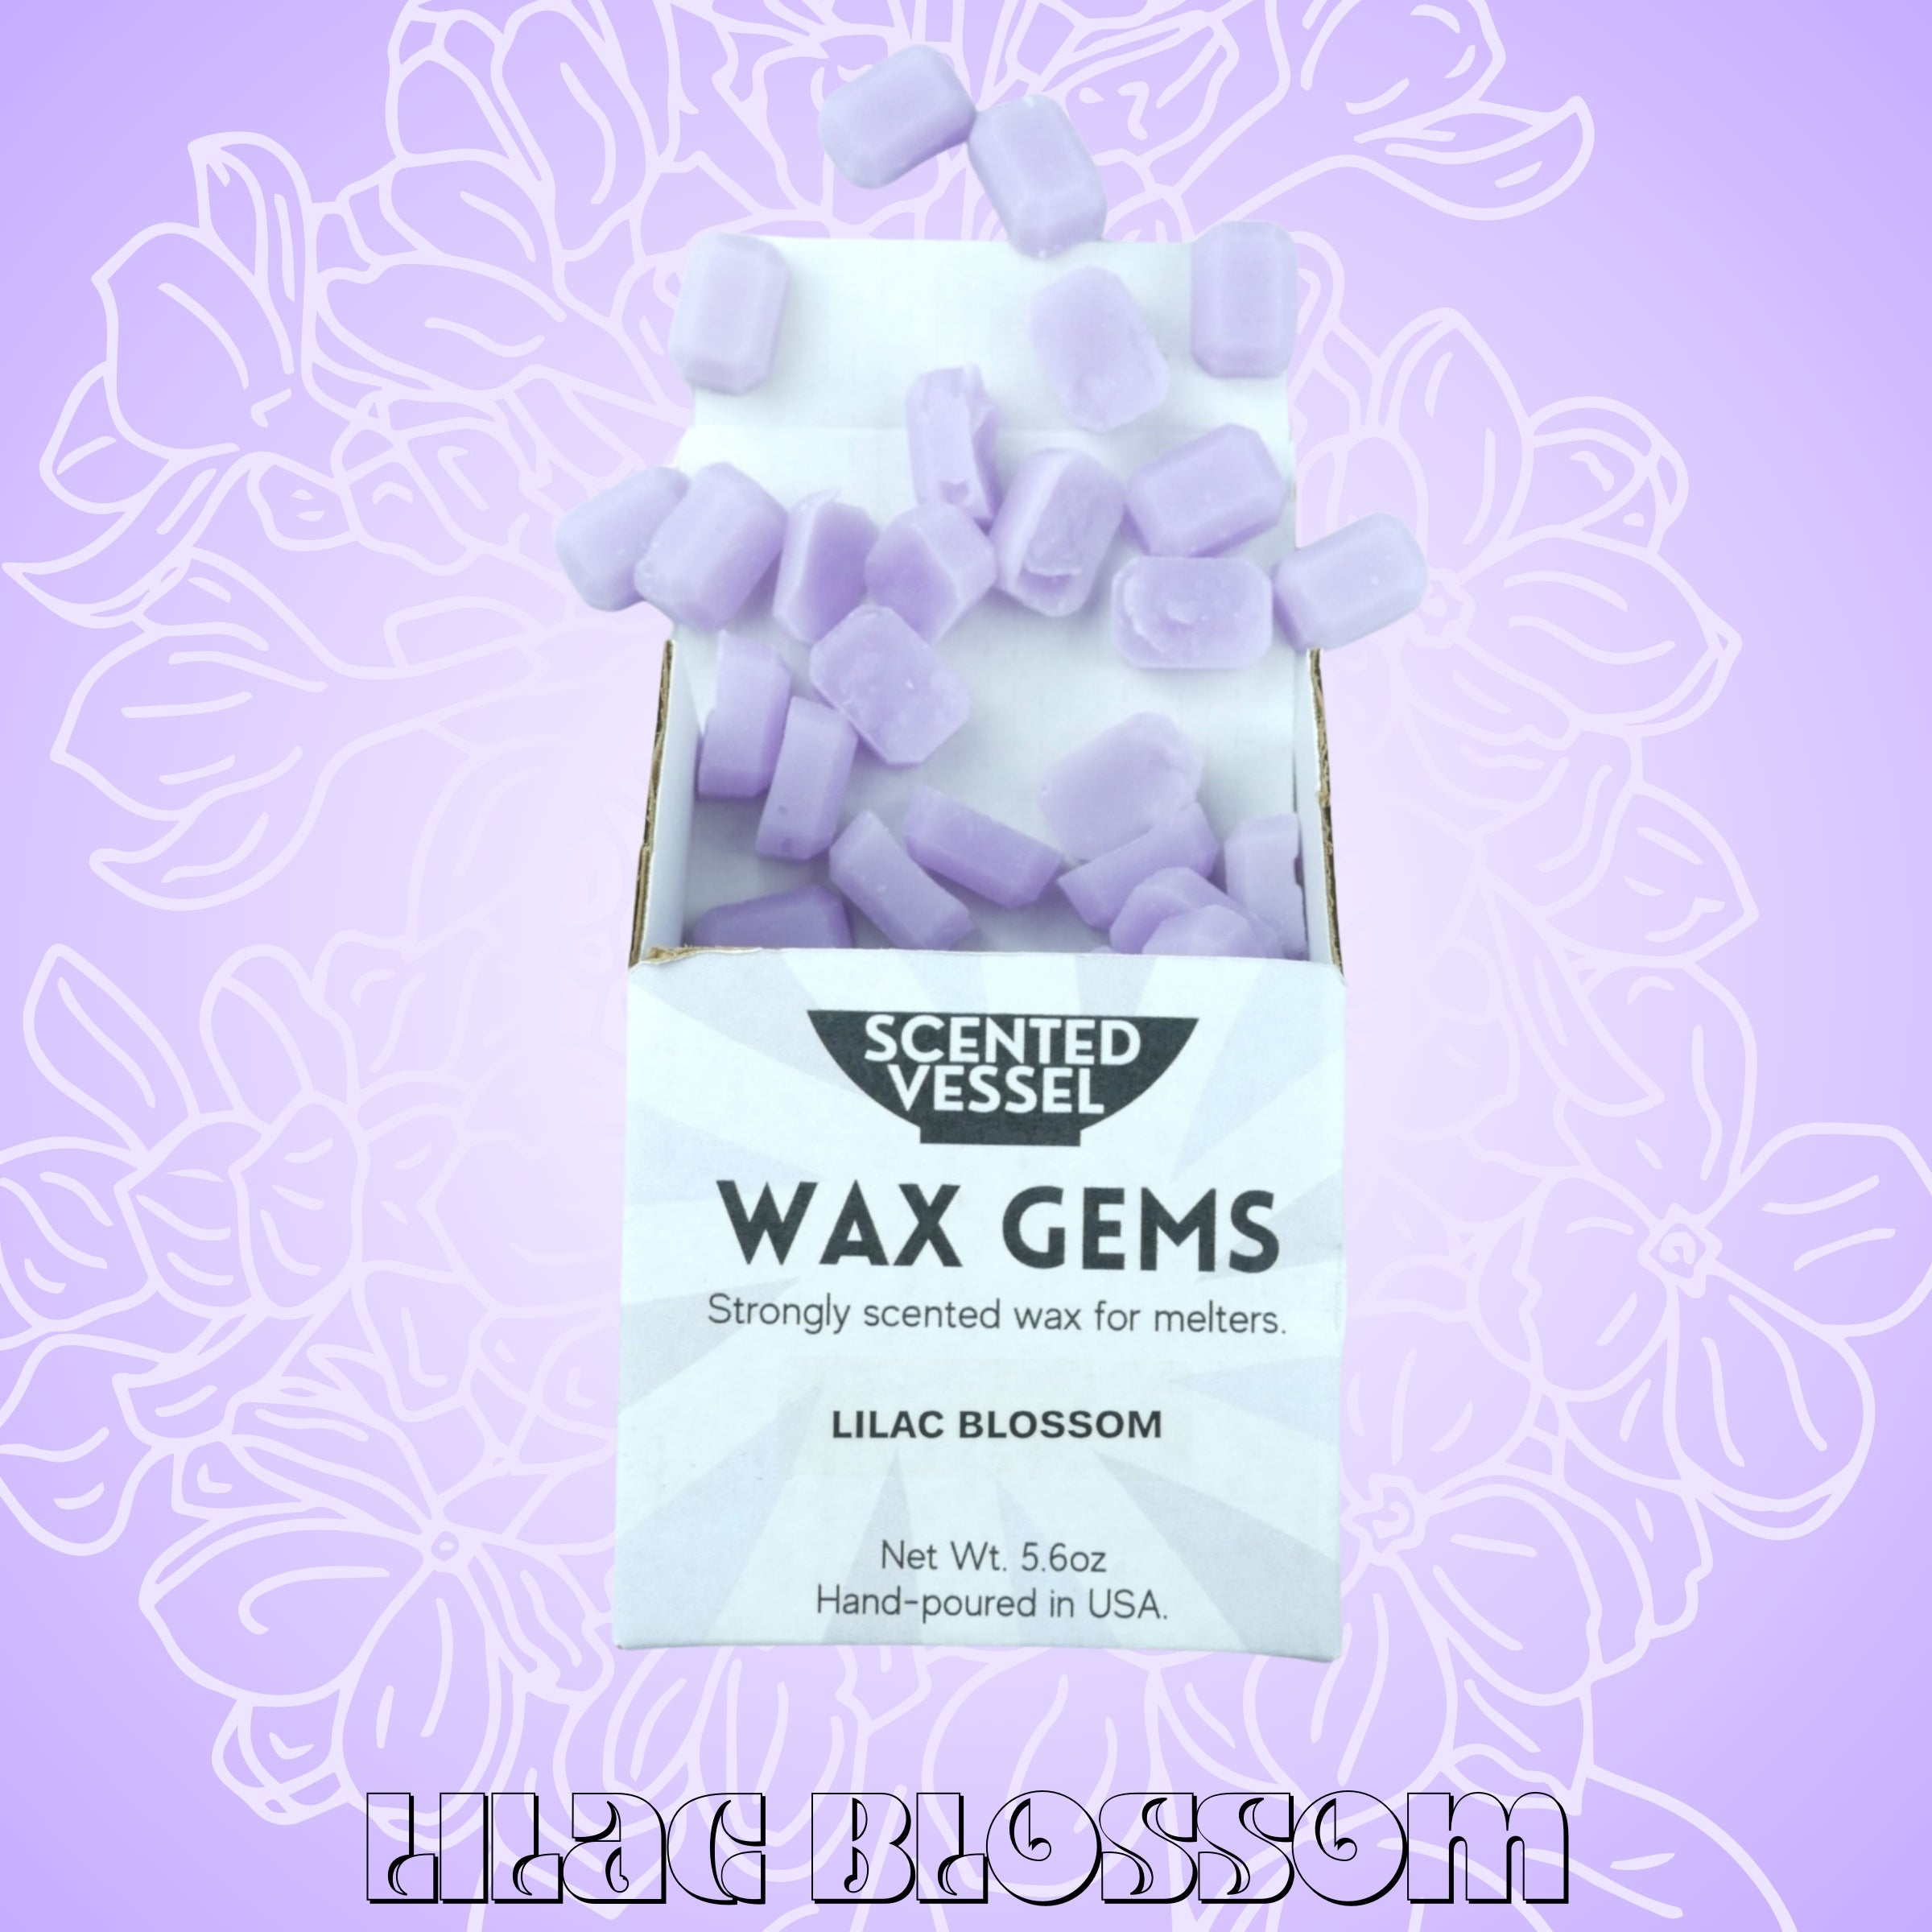 Lilac Blossom 5.6oz Wax Gems by Scented Vessel